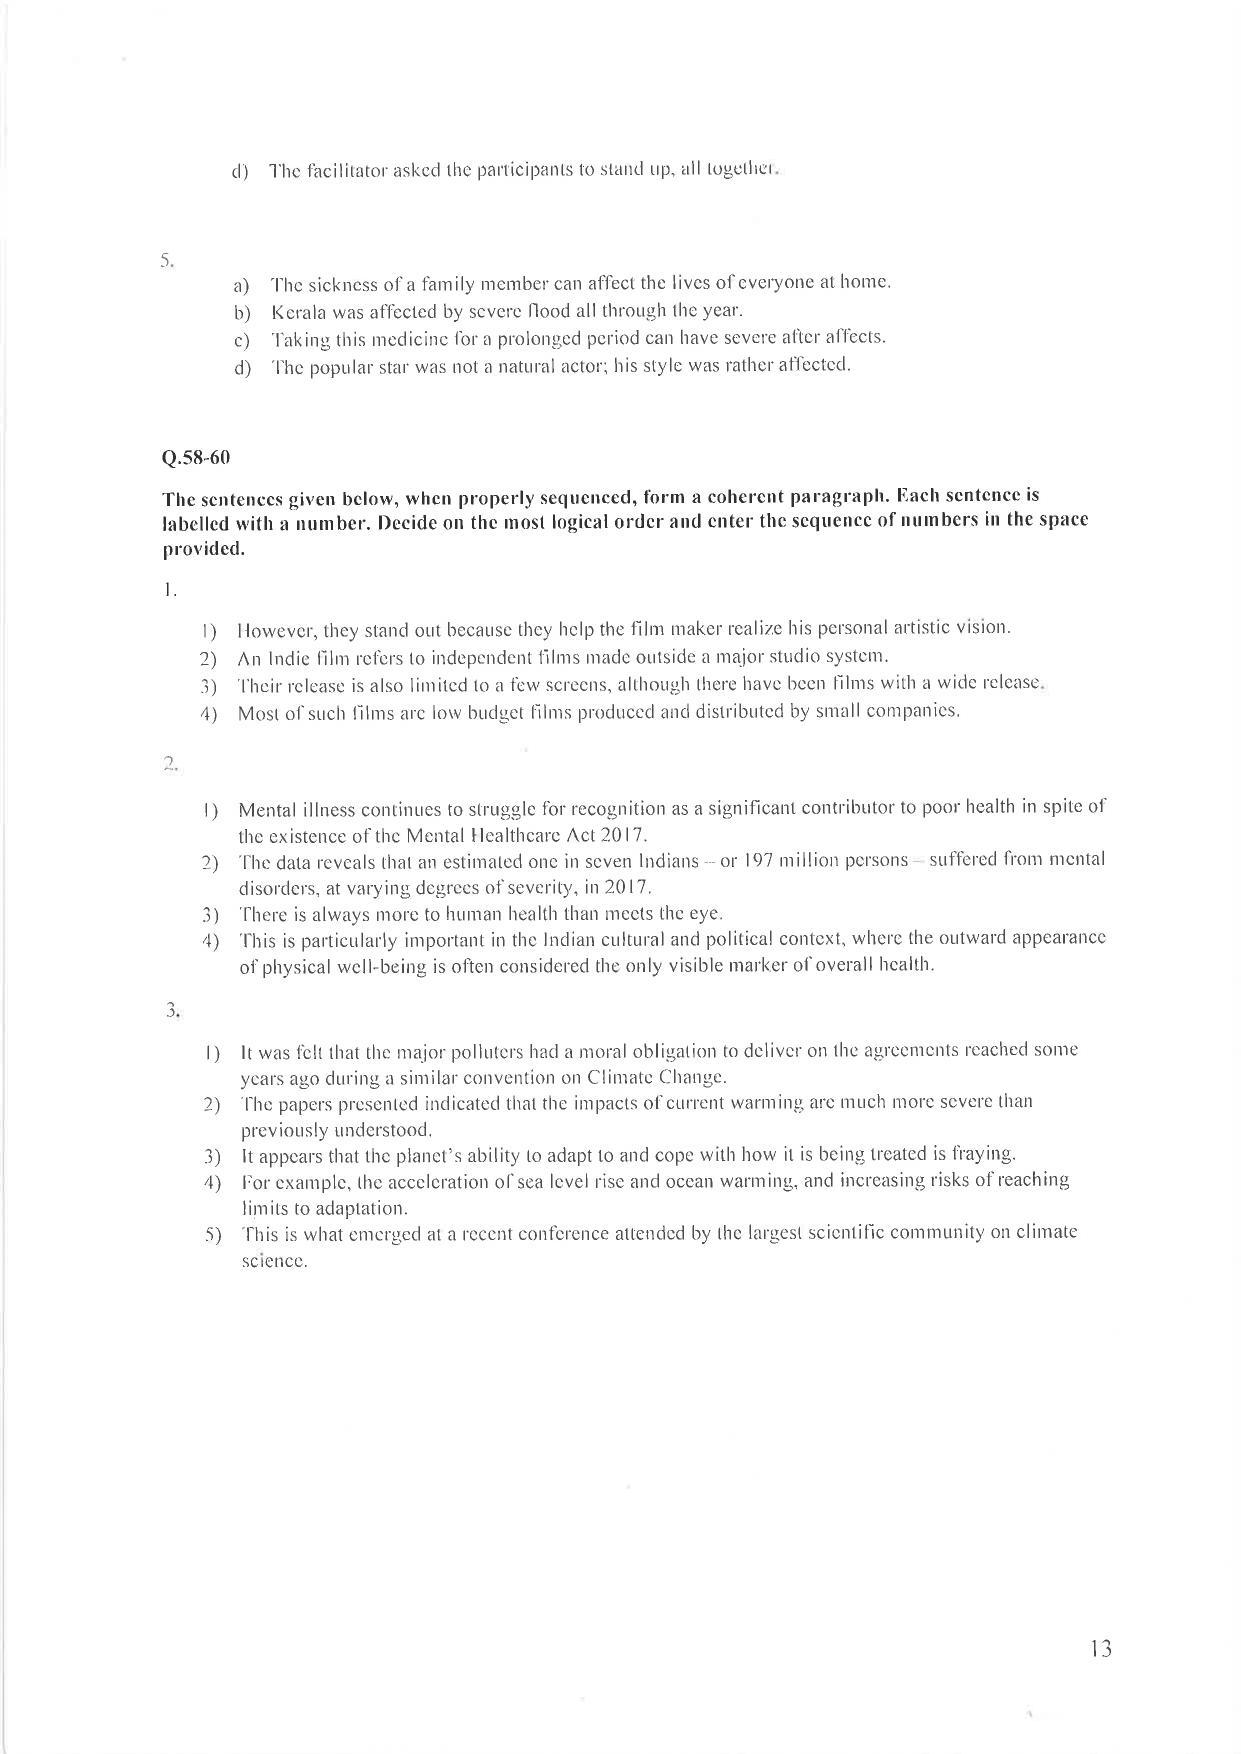 IIM Indore IPM 2020 Question Paper - Page 13